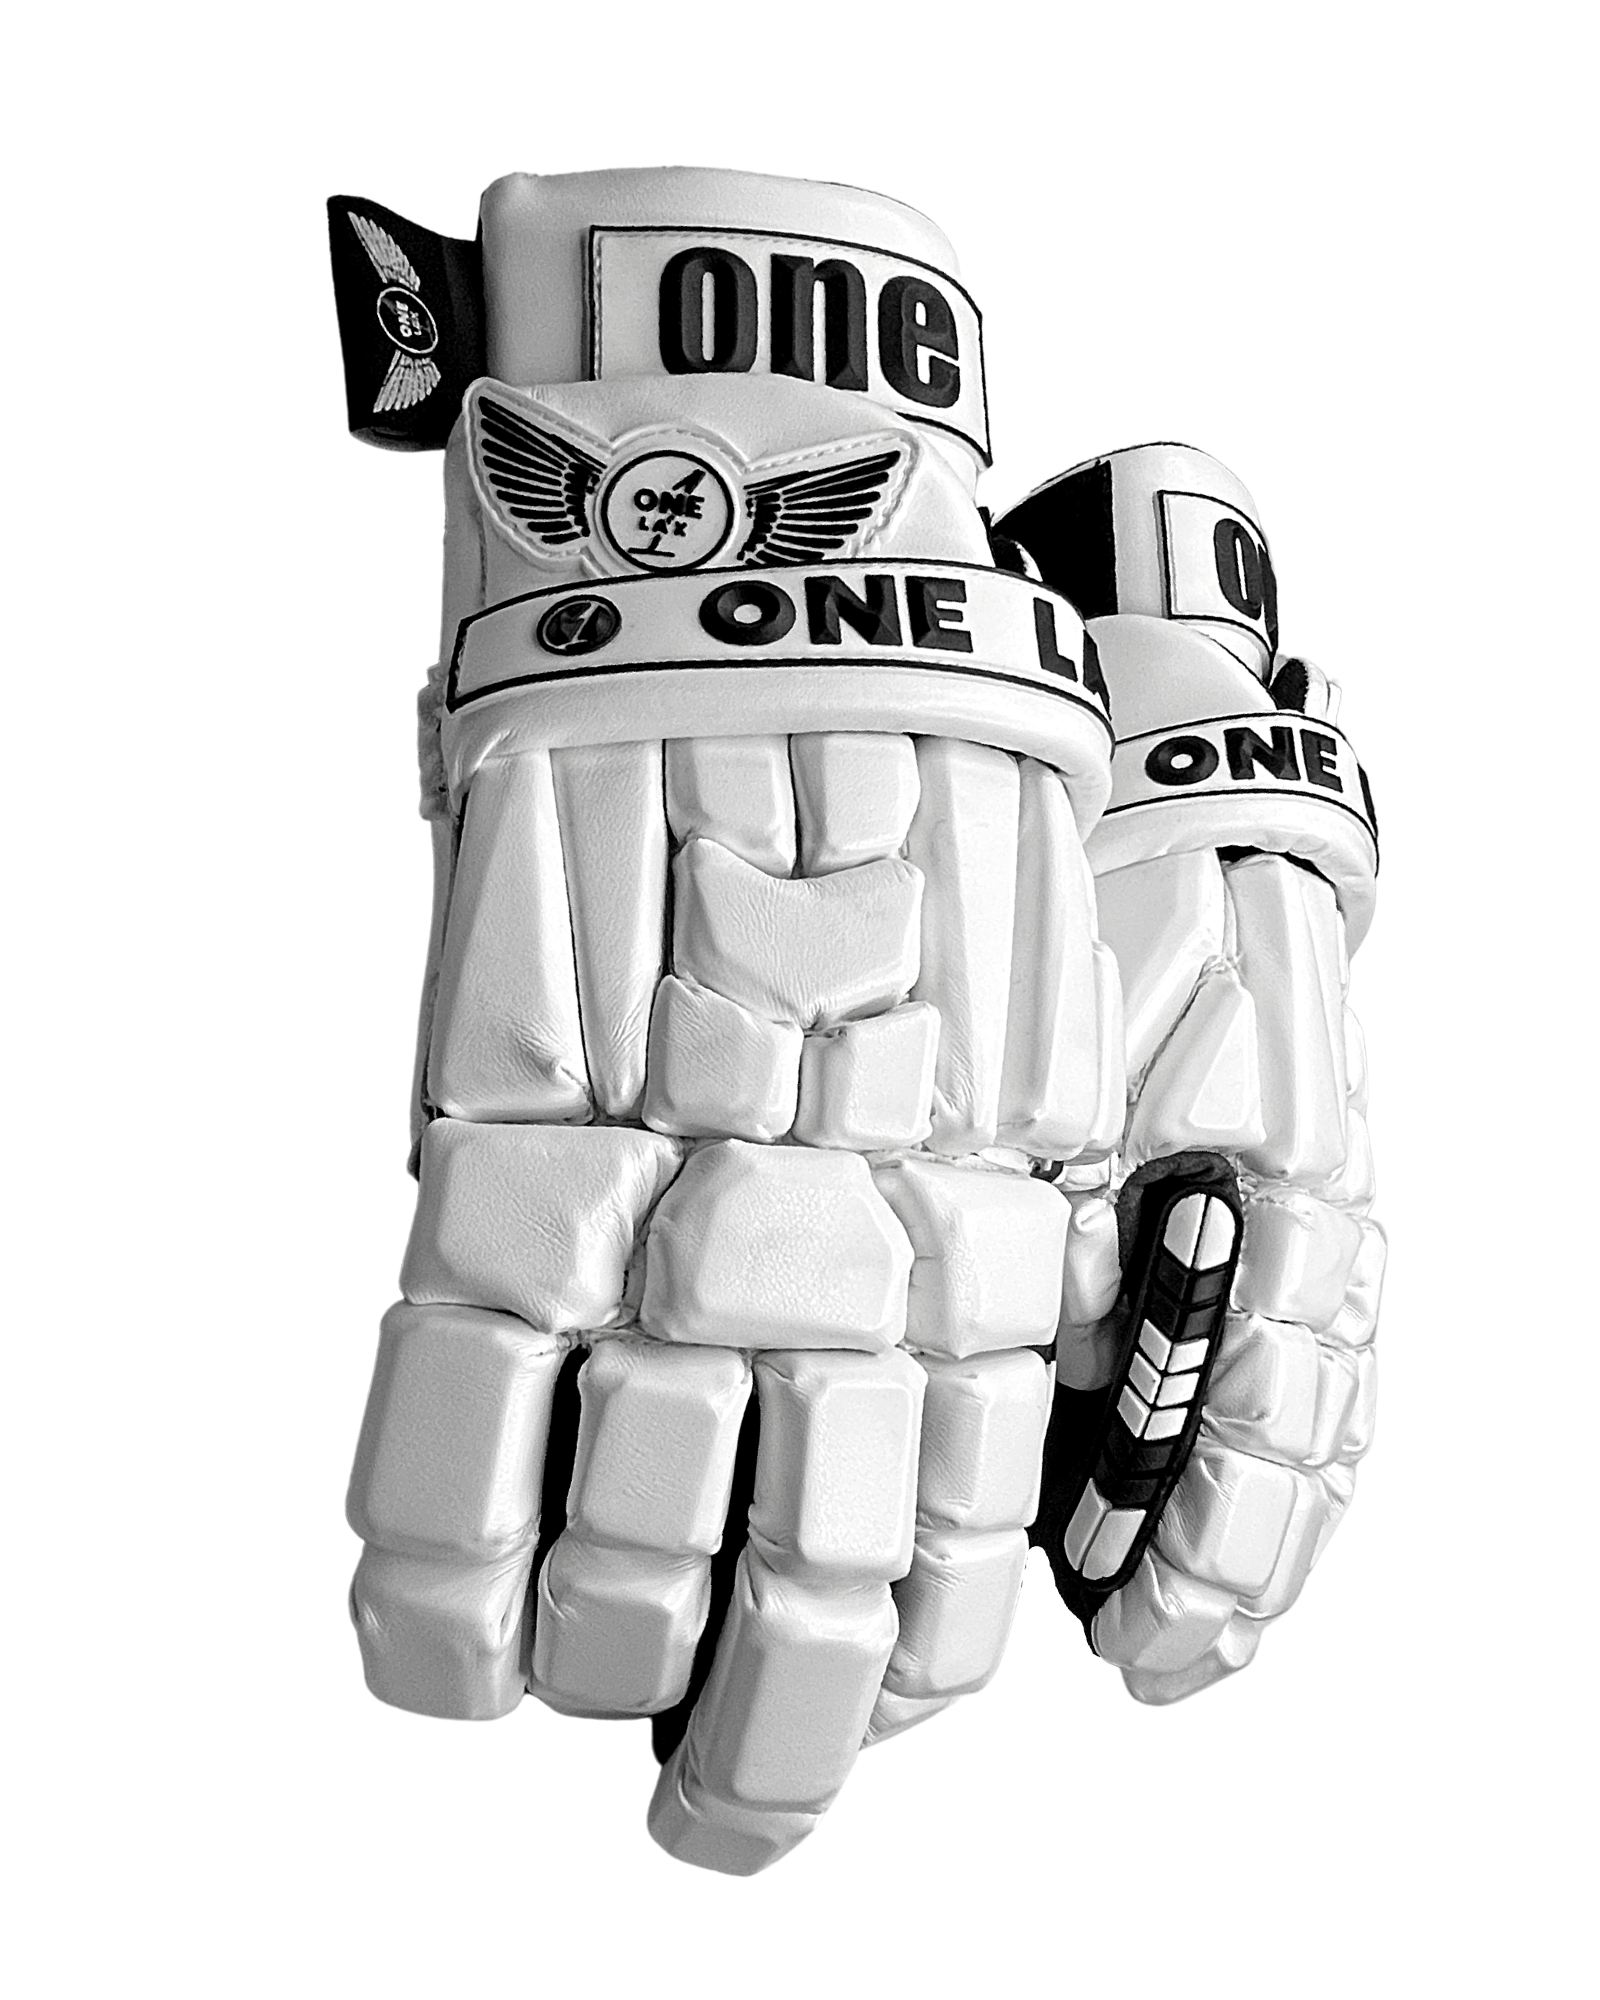 JR. 1 Gloves in White | 2 Kids Sizes Available | HYBRID Box & Field Lacrosse Gloves - One Lax